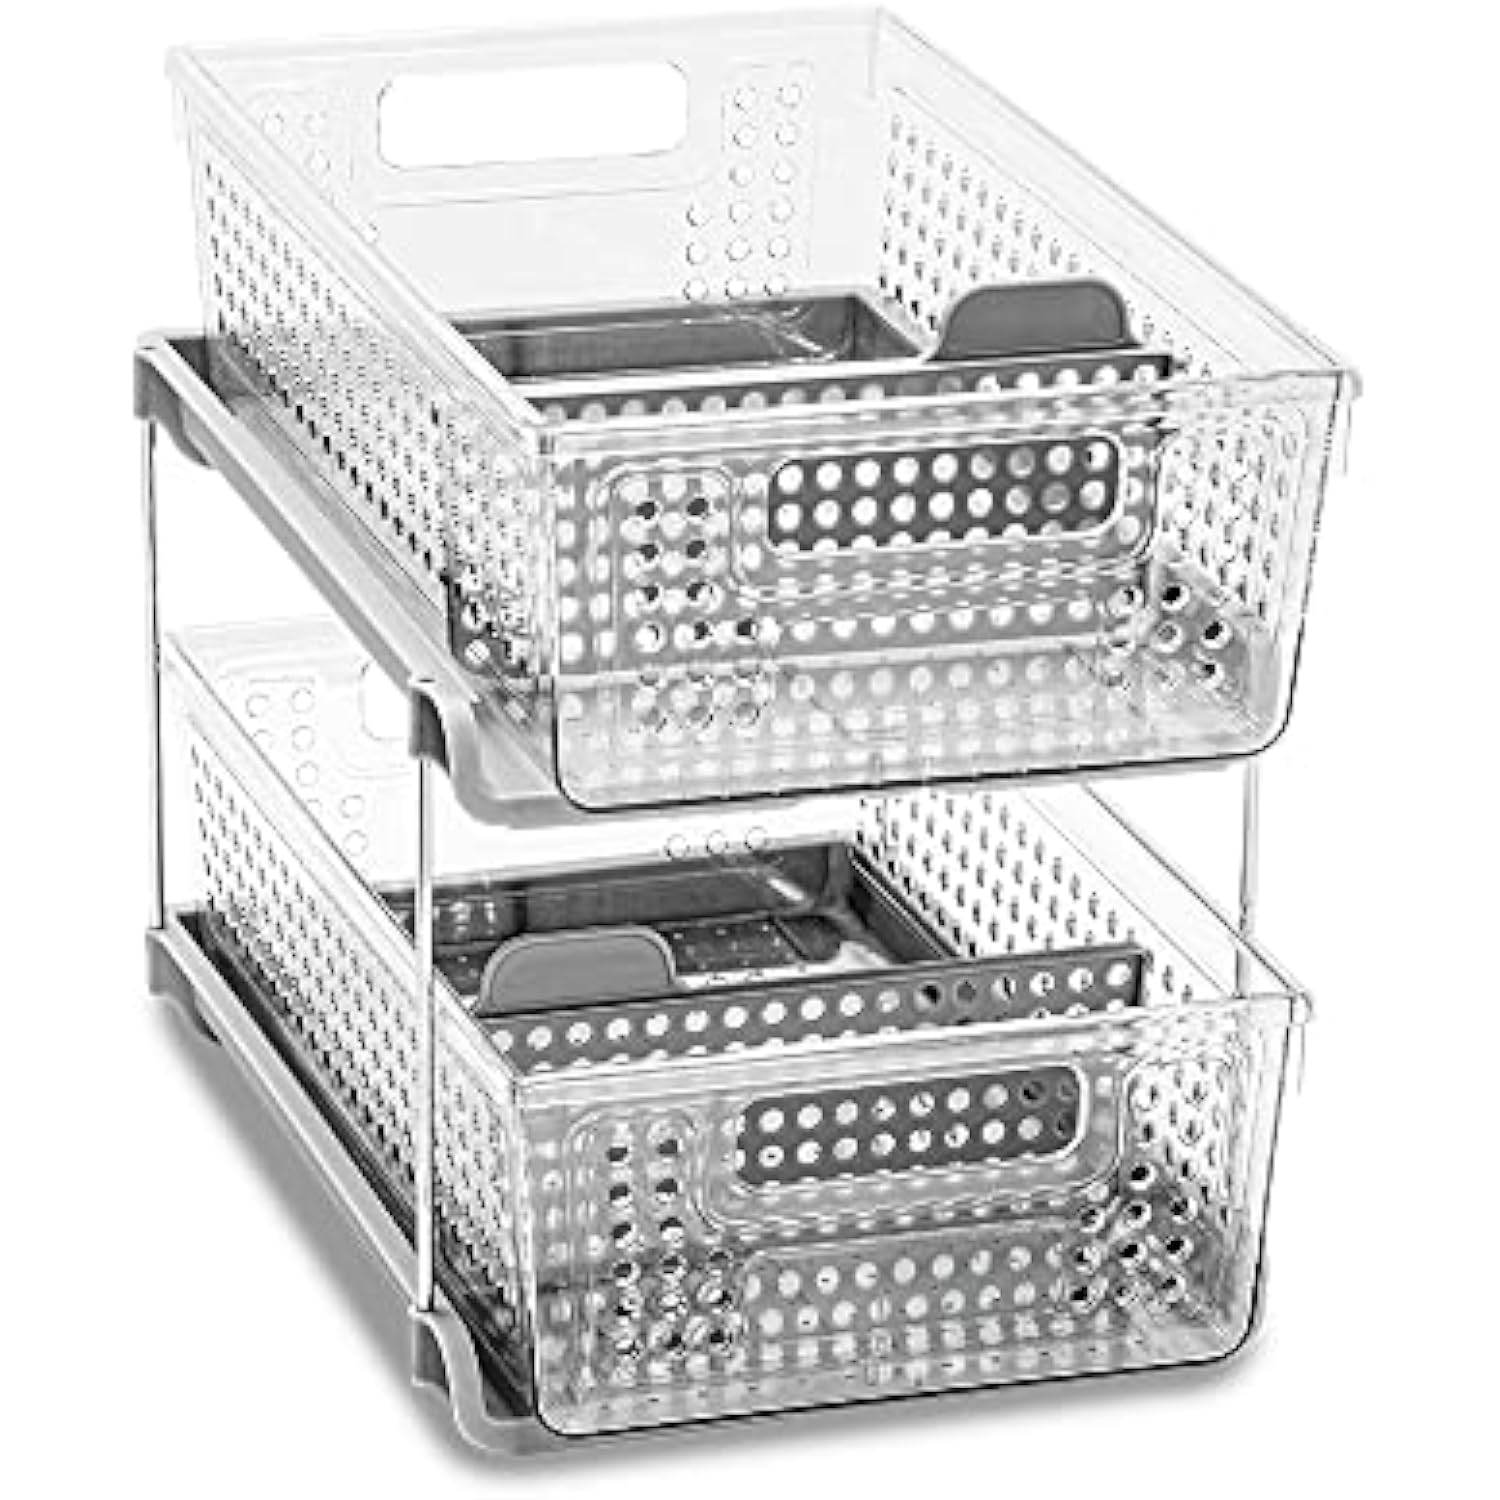 Madesmart 2-Tier Plastic Multipurpose Organizer with Divided Slide-Out  Storage Bins, Under Sink and Cabinet Organizer Rack, Frost, Pack of 4